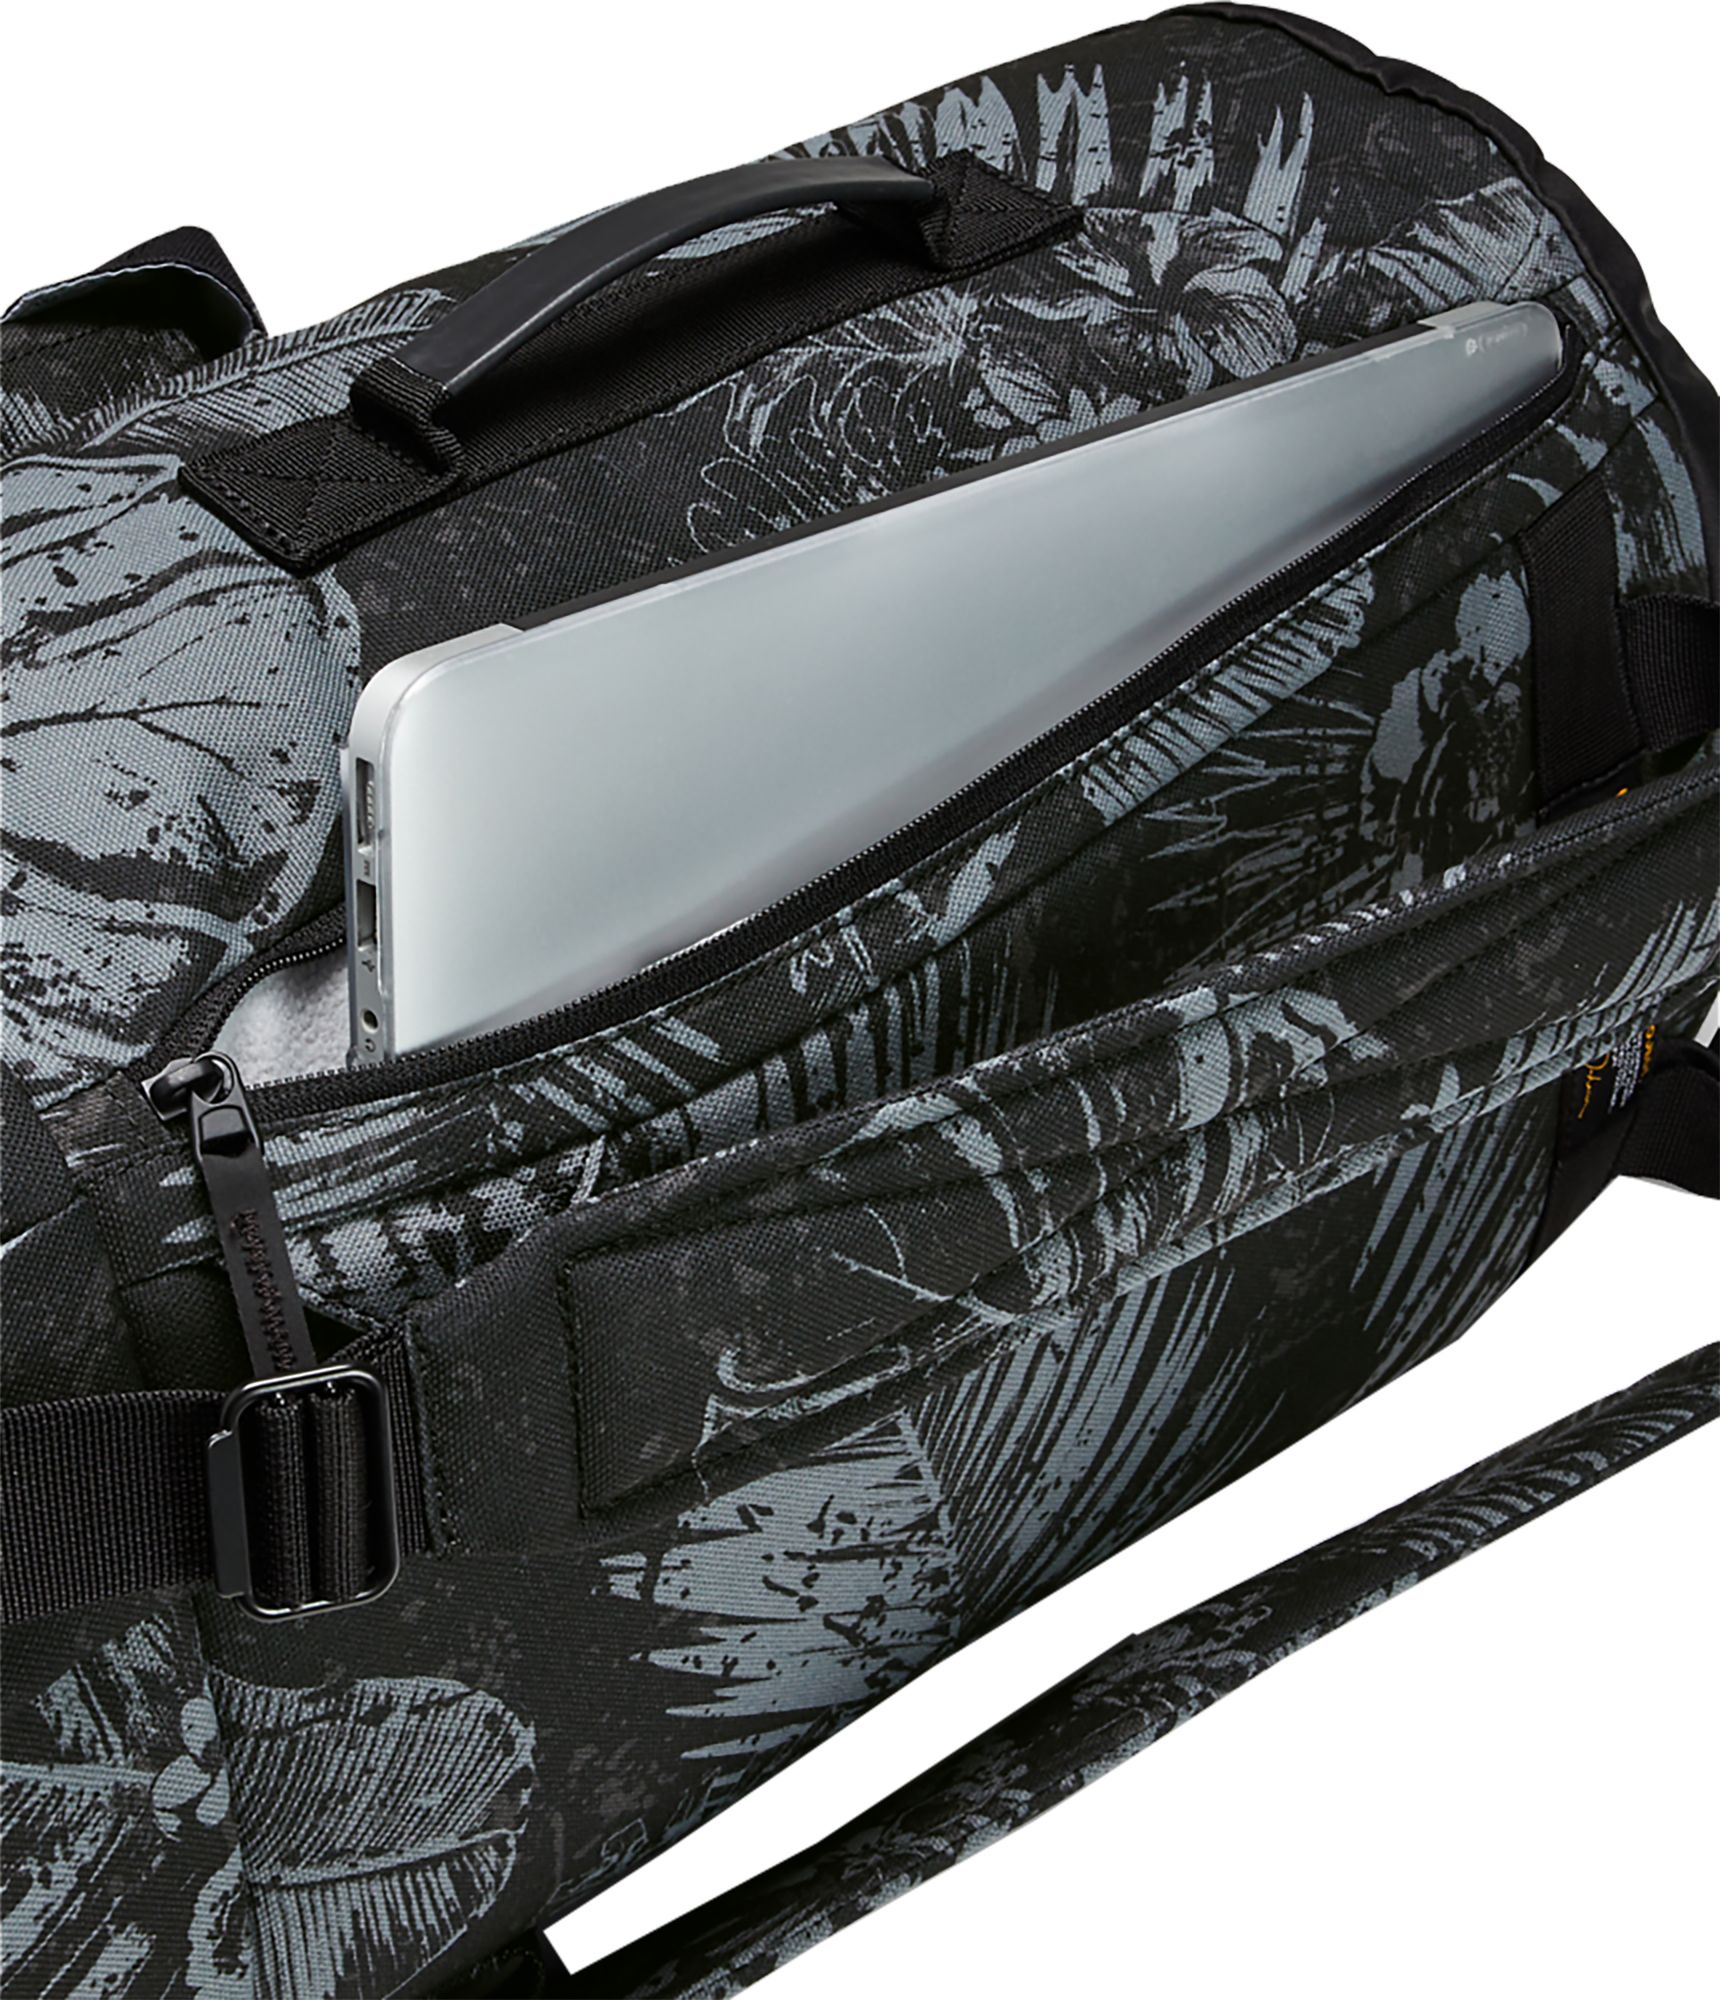 project rock 60 bag review